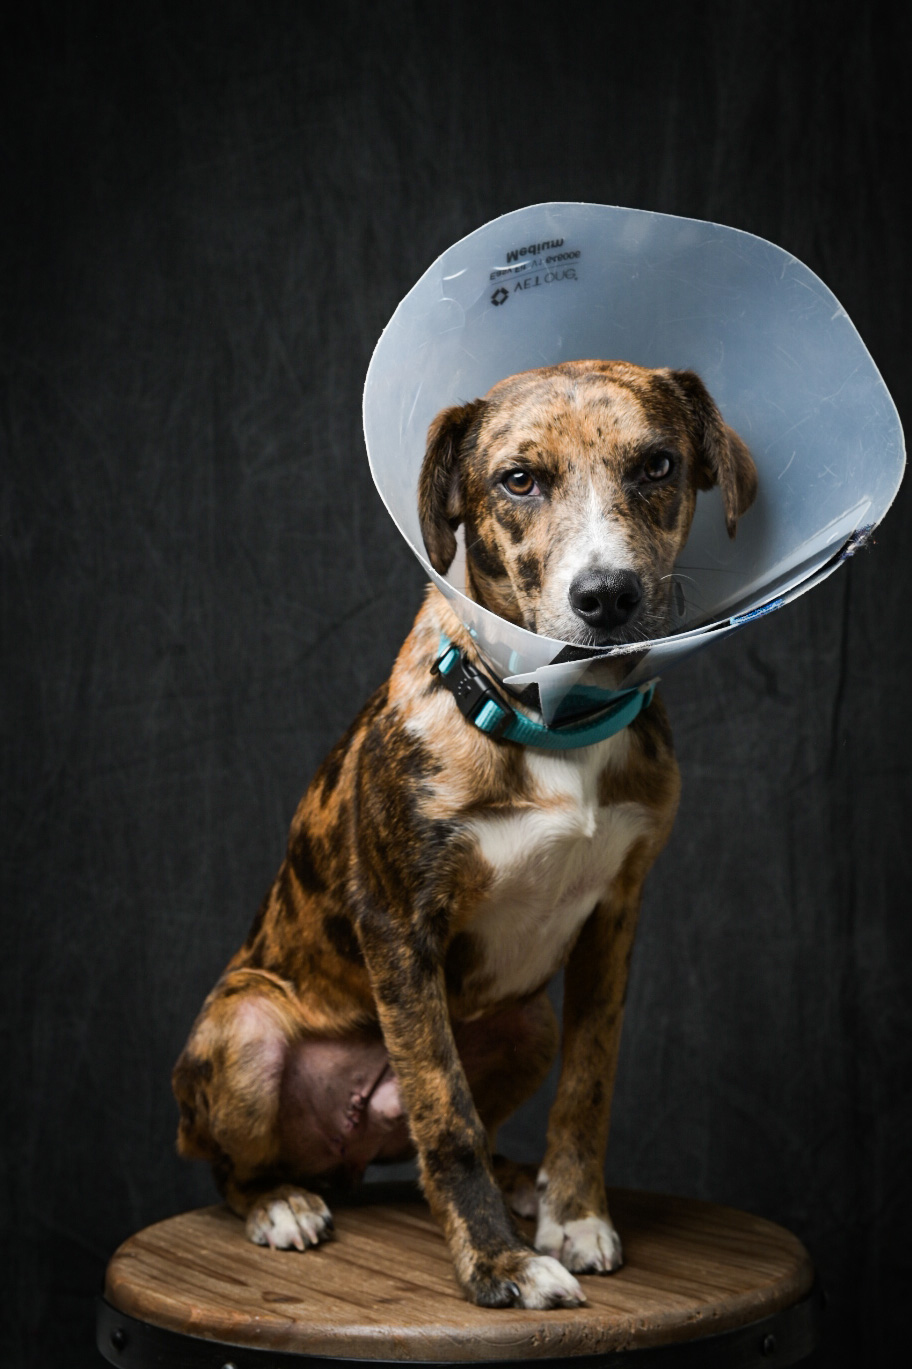 Buddy Lee, a rescue pup from Take Paws, poses for his first official portrait